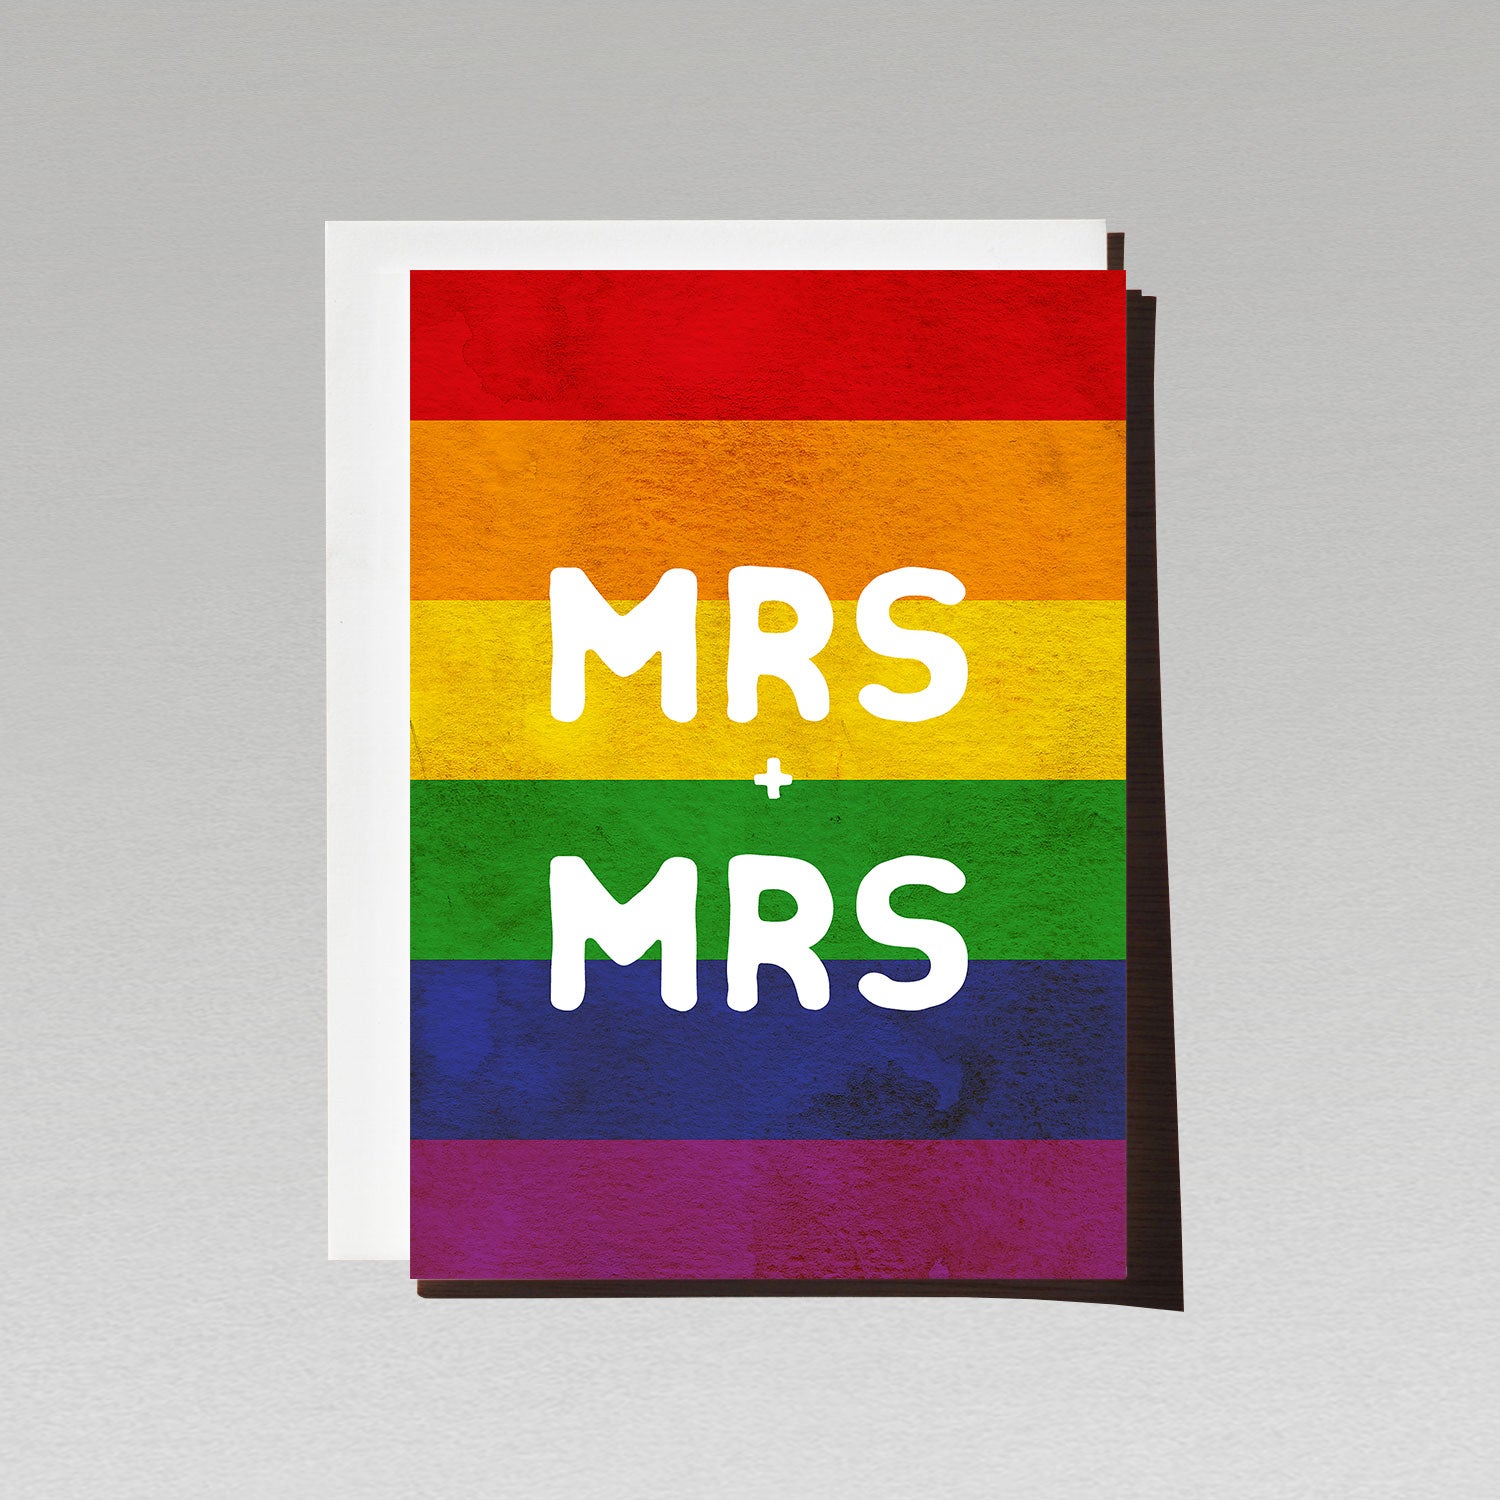 Greeting card with large white text Mrs + Mrs on LGBTQI rainbow flag background